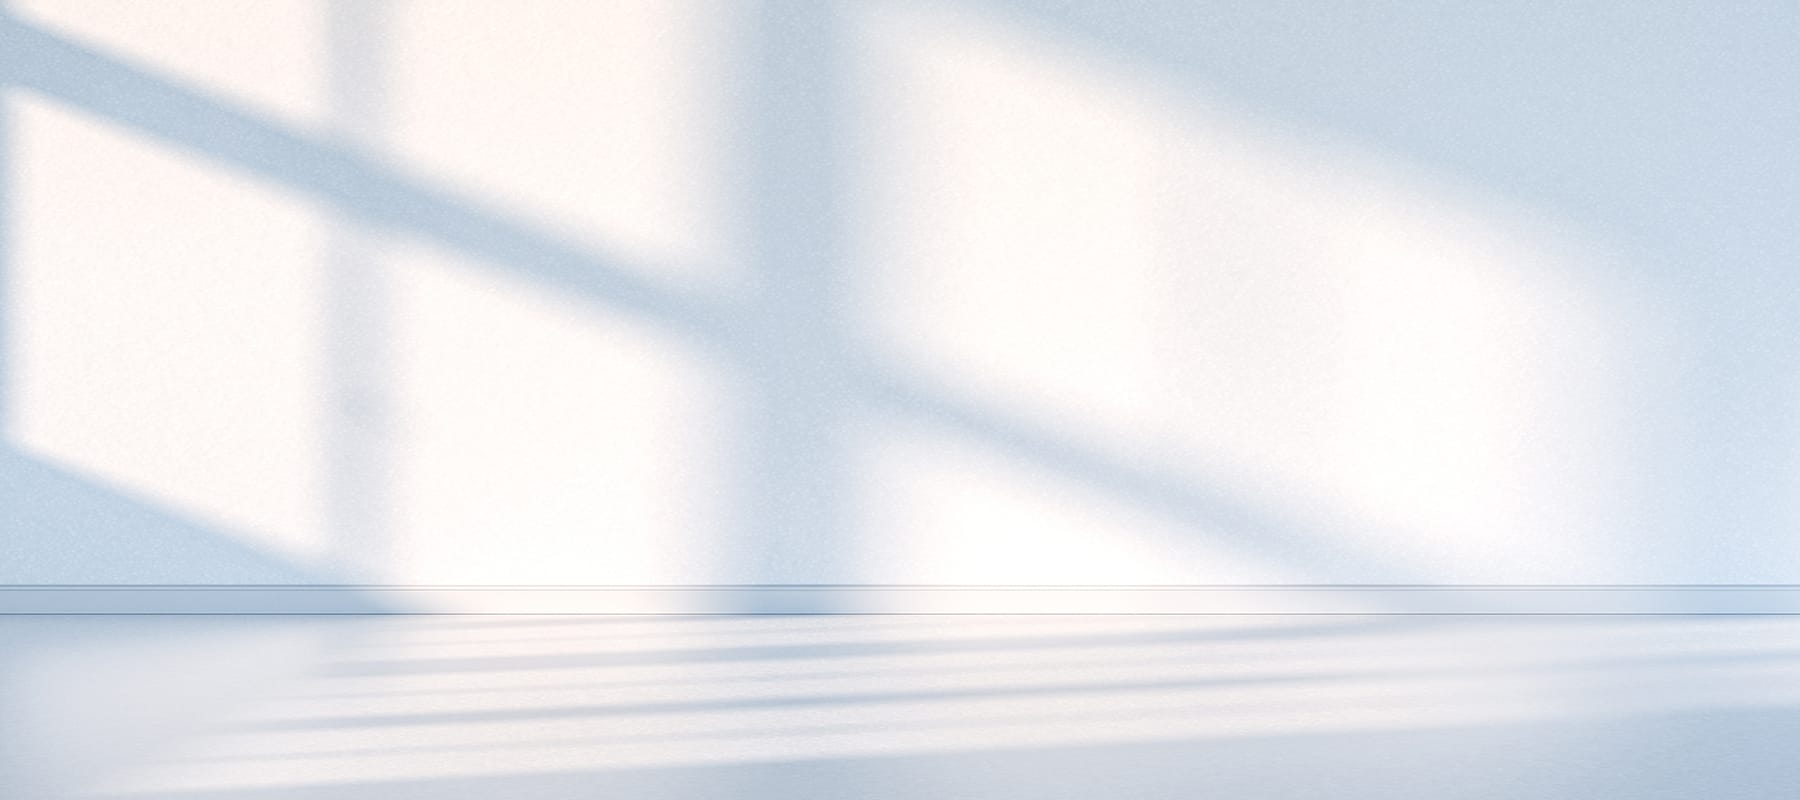 A wall with natural sunlight peaking in through a window, showing the shadows of the window.